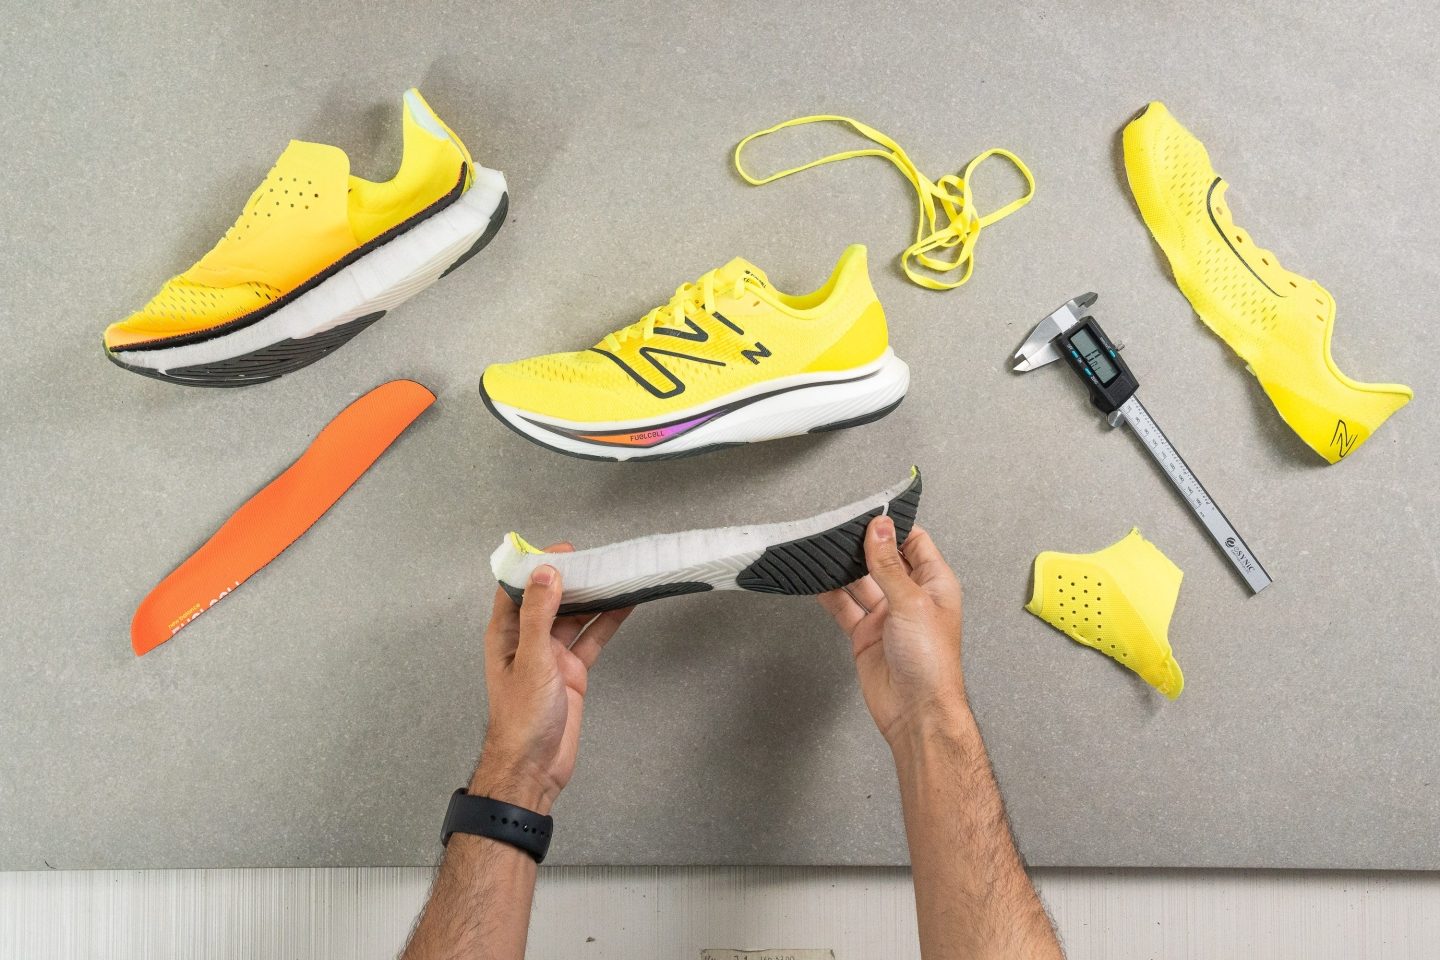 Cut in half: New Balance FuelCell Rebel v3 Review | RunRepeat